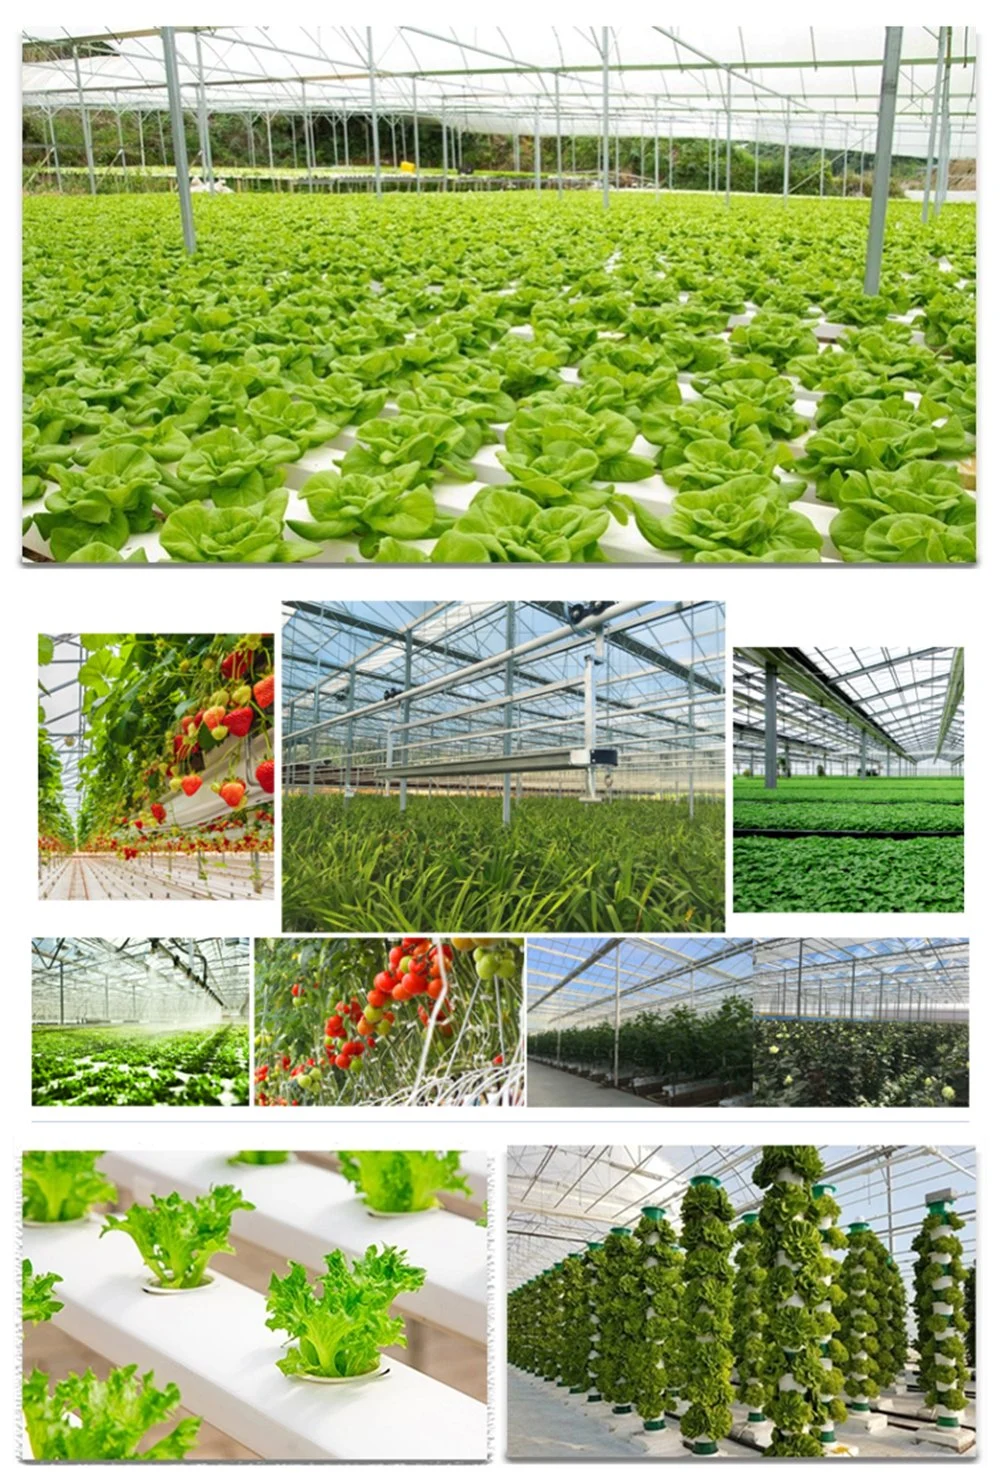 PC Sheet Agricultural Greenhouse Growing/Planting/Farming Tomato/Cucumber/Strawberry with Hydroponics Systems